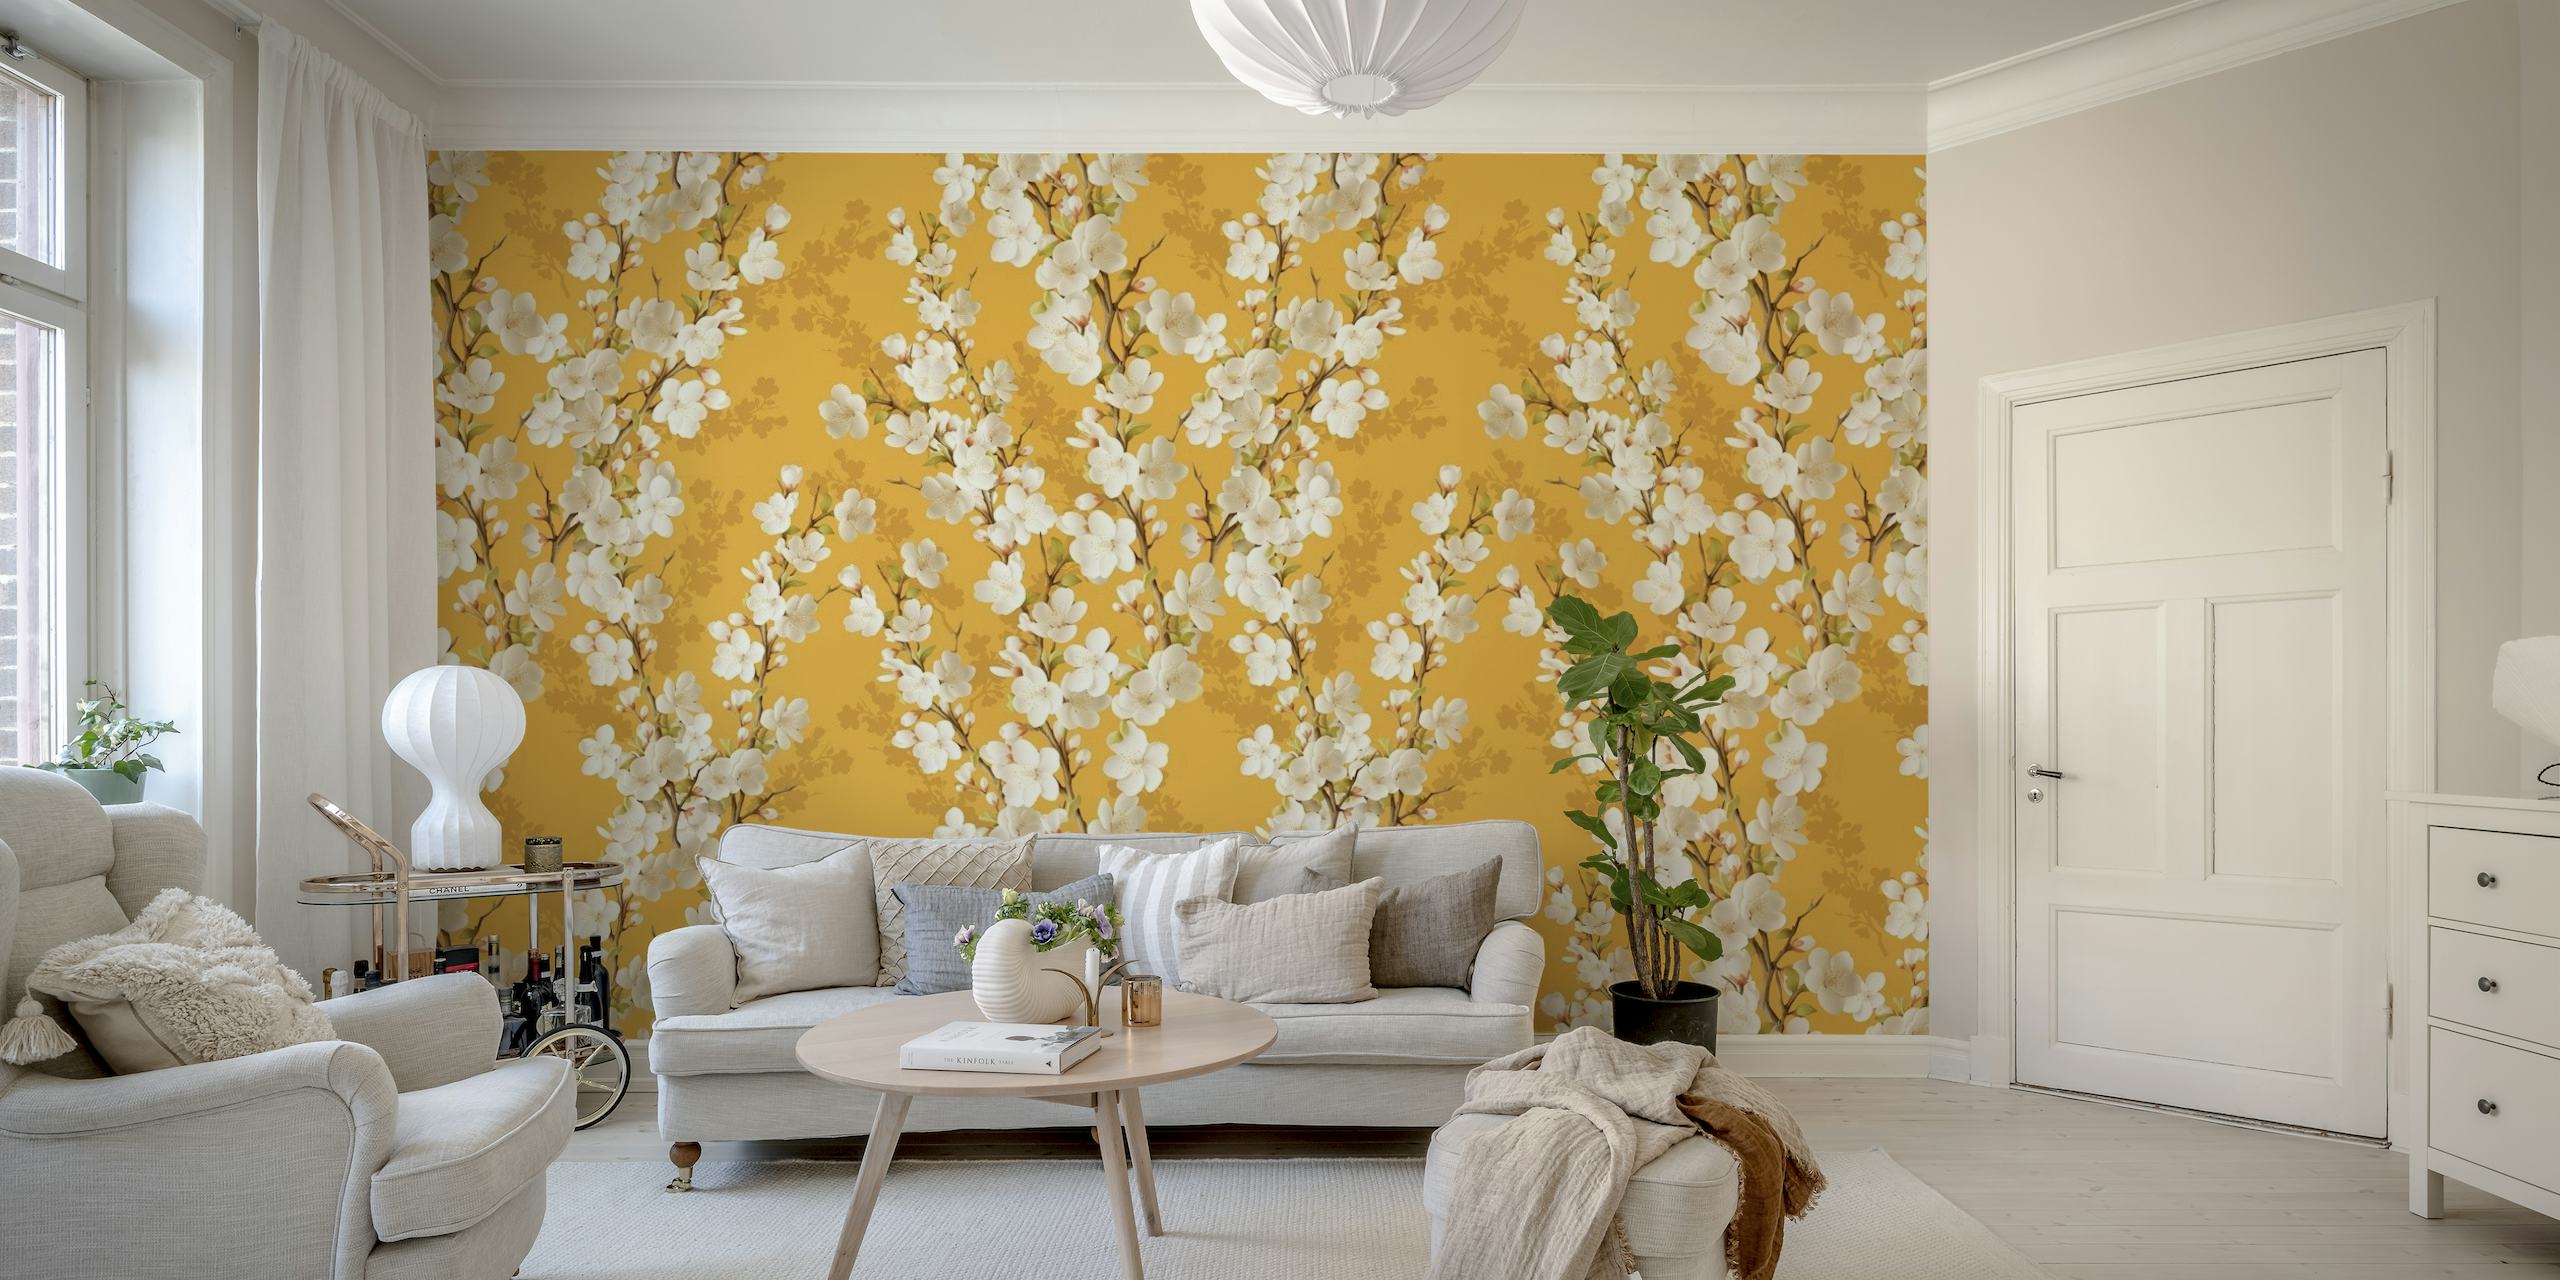 Cherry blossom indian yellow MURAL scale a wallpaper